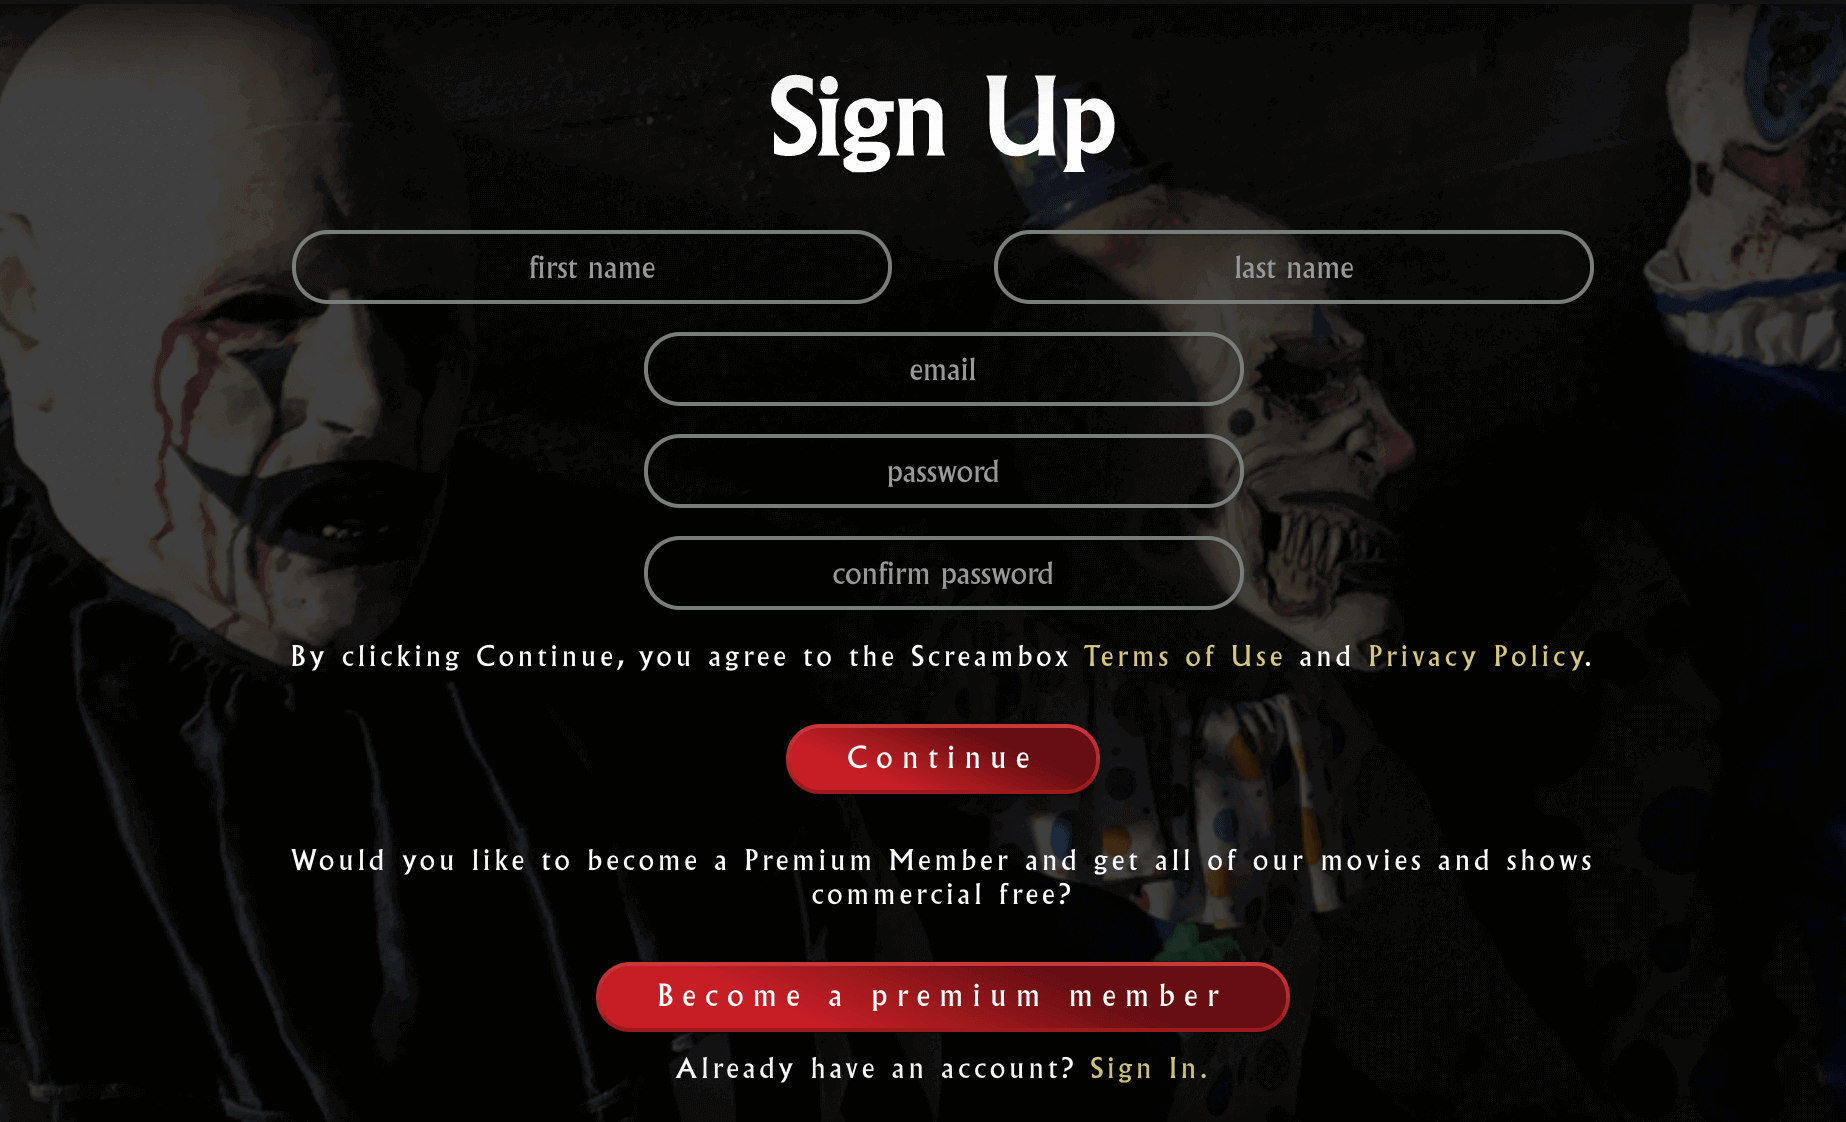 enter all the required details and click continue to get Screambox subscription